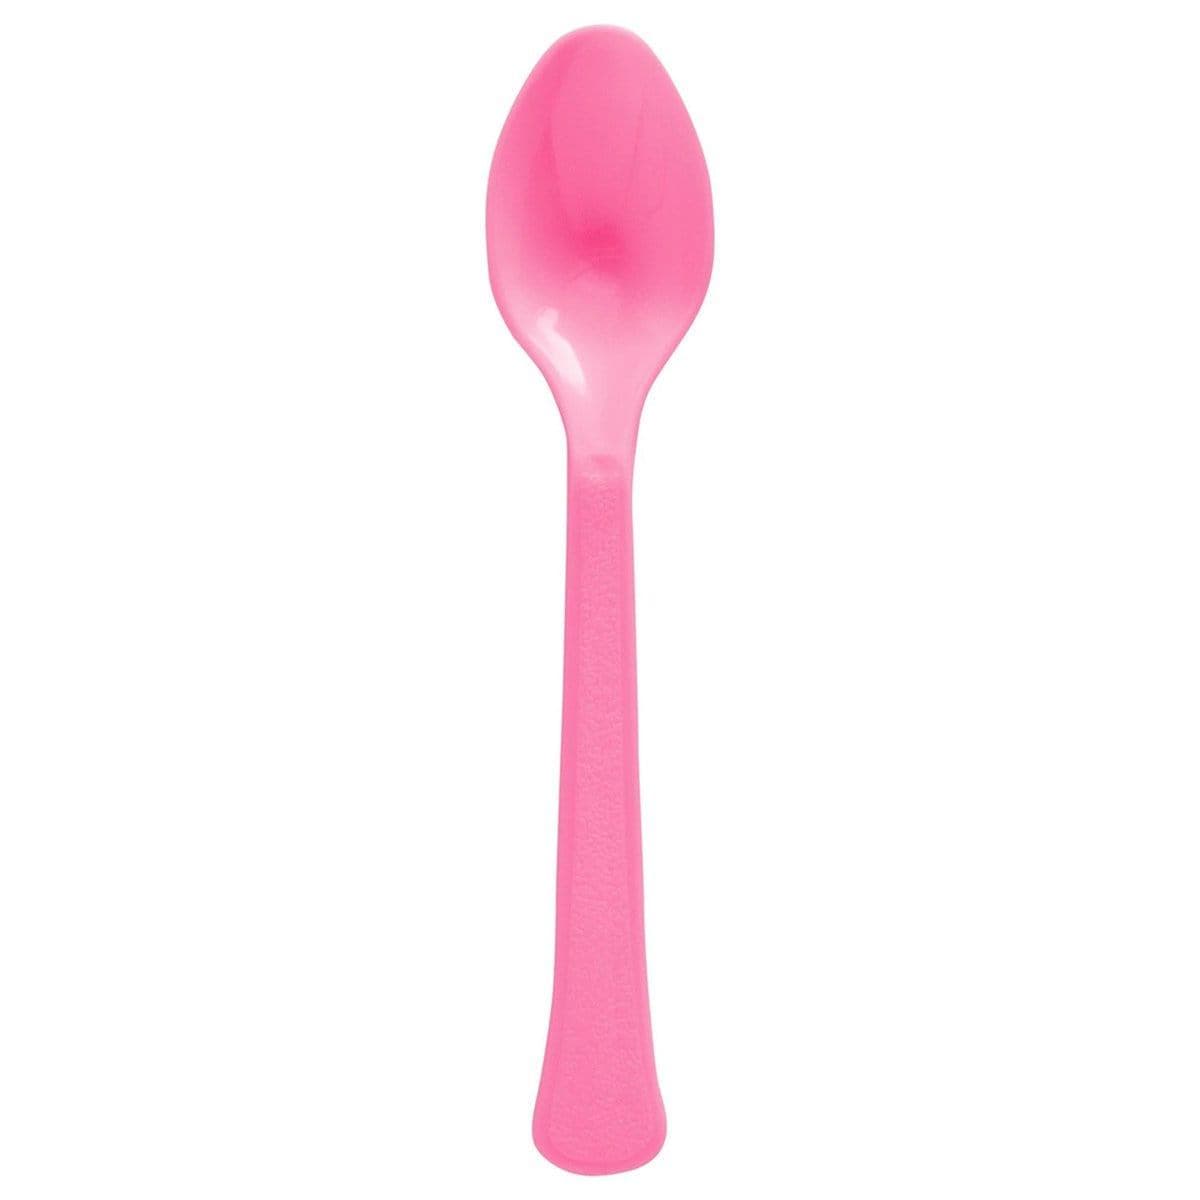 Buy Plasticware Bright Pink Plastic Spoons, 20 Count sold at Party Expert